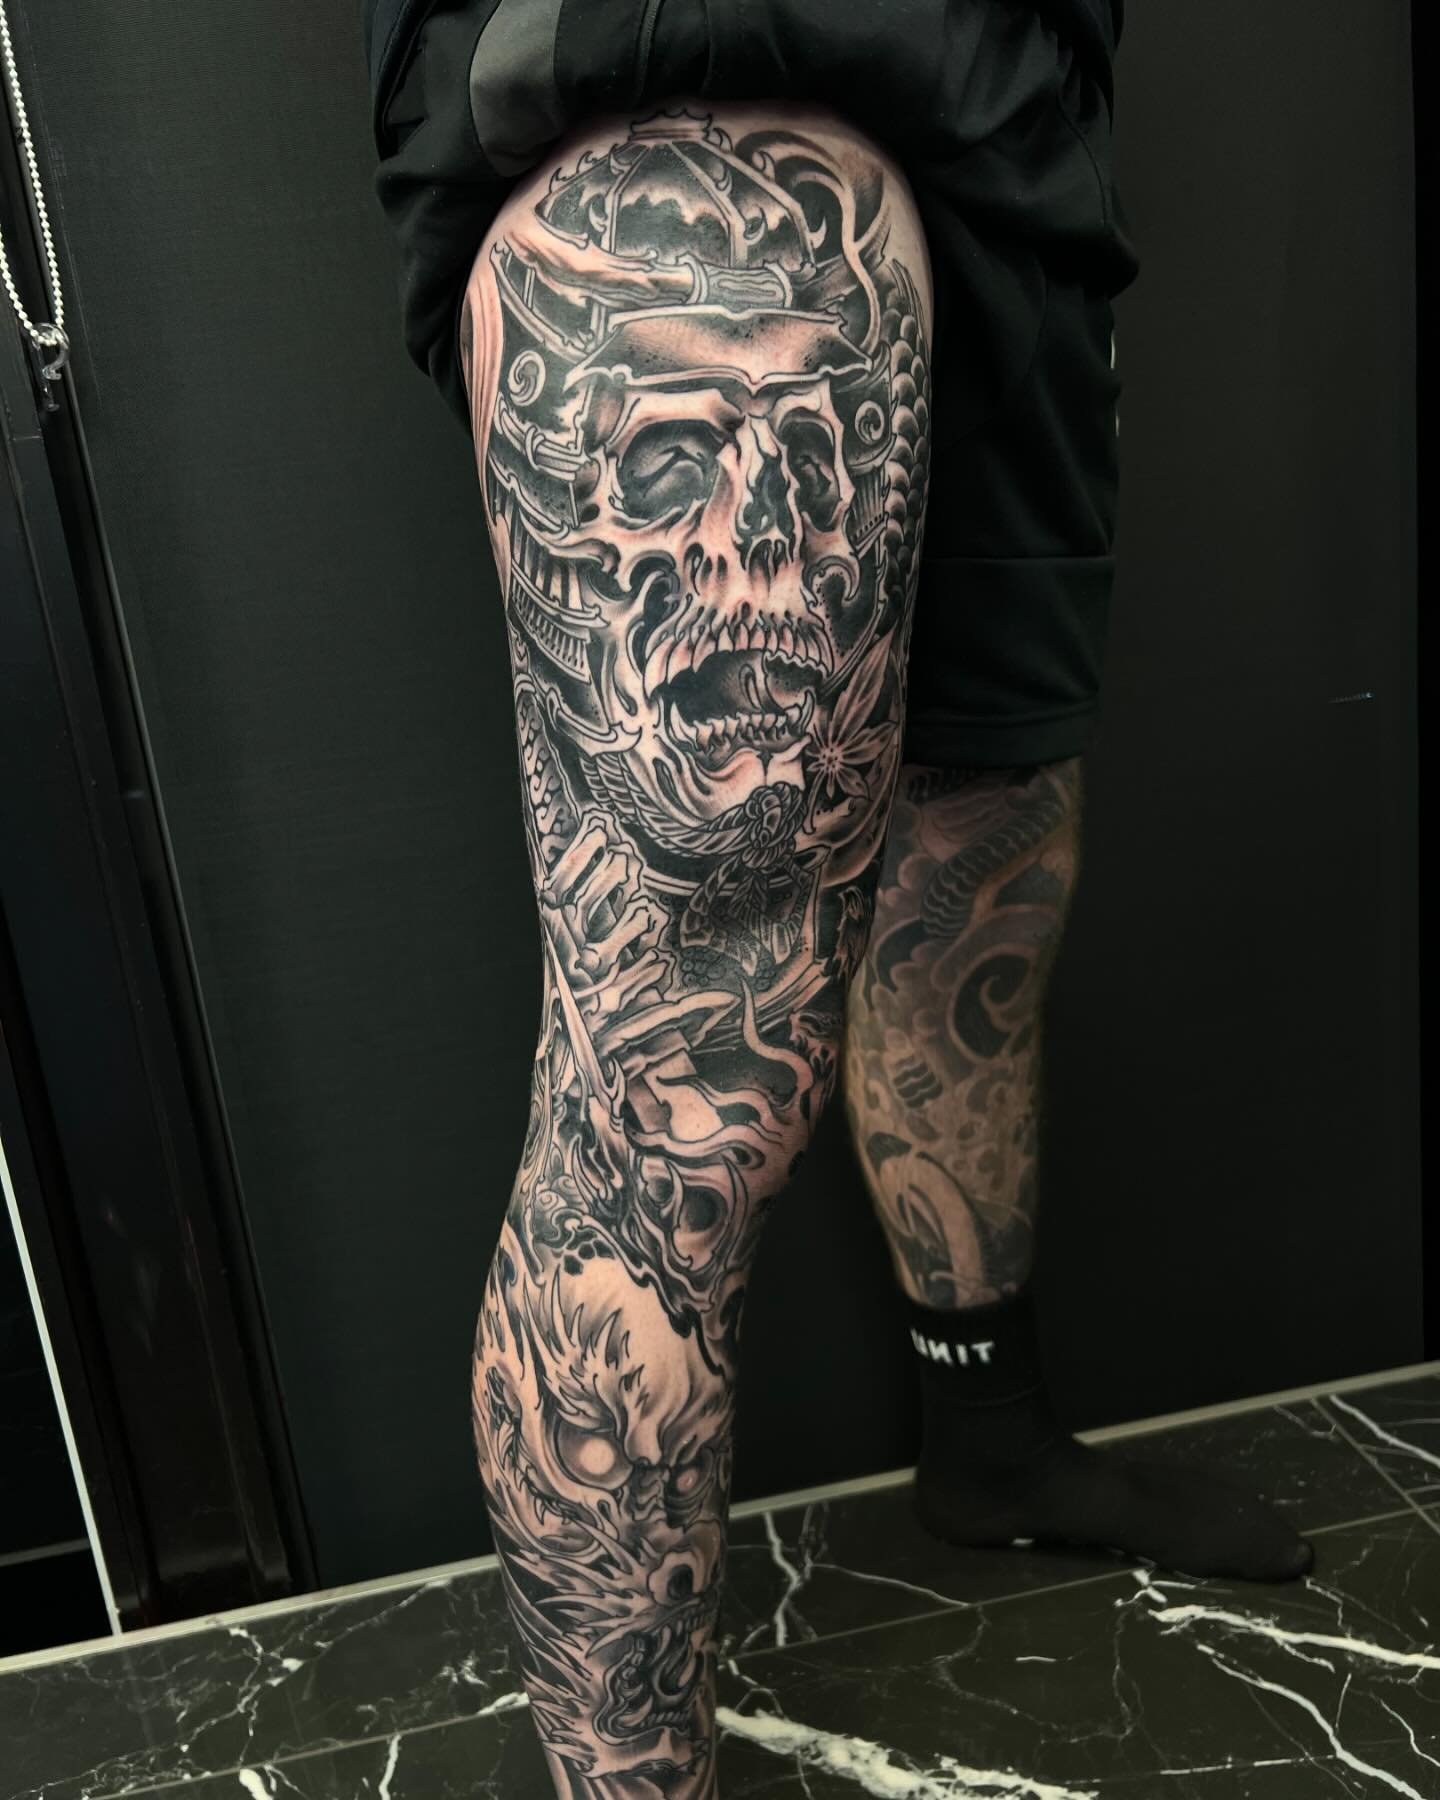 Fully wrapped Japanese leg sleeve smashed out by @gorrtex___ 

Gorze has space in May for big bookings !

Afterpay and Laybuy available